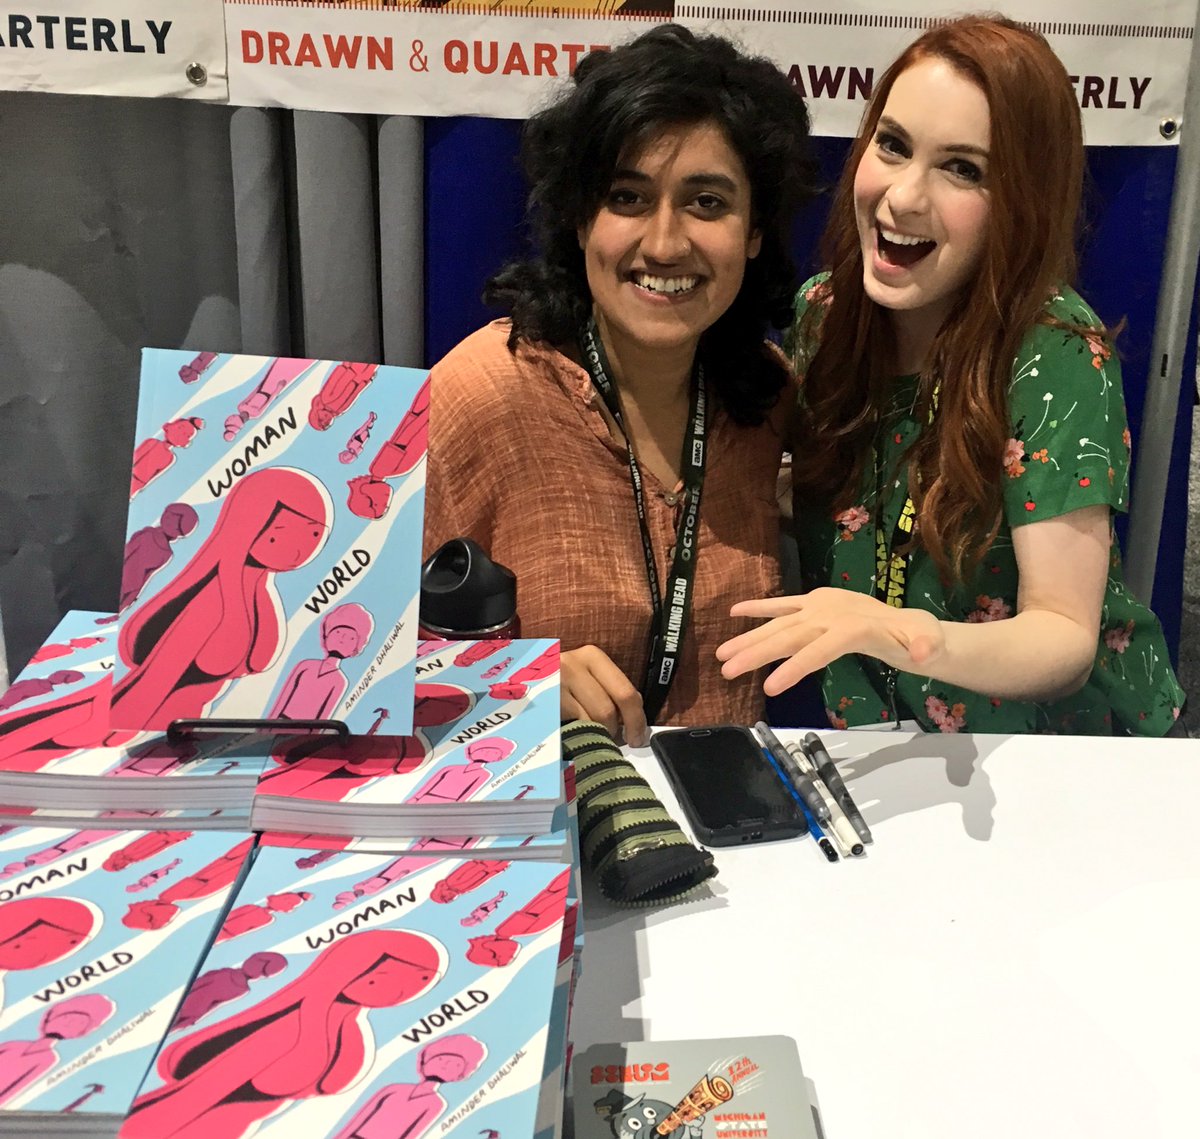 Stopped by to celebrate the amazing @aminder_d and her new book launch, Woman World! #SDCC https://t.co/pkPH1kuzEE